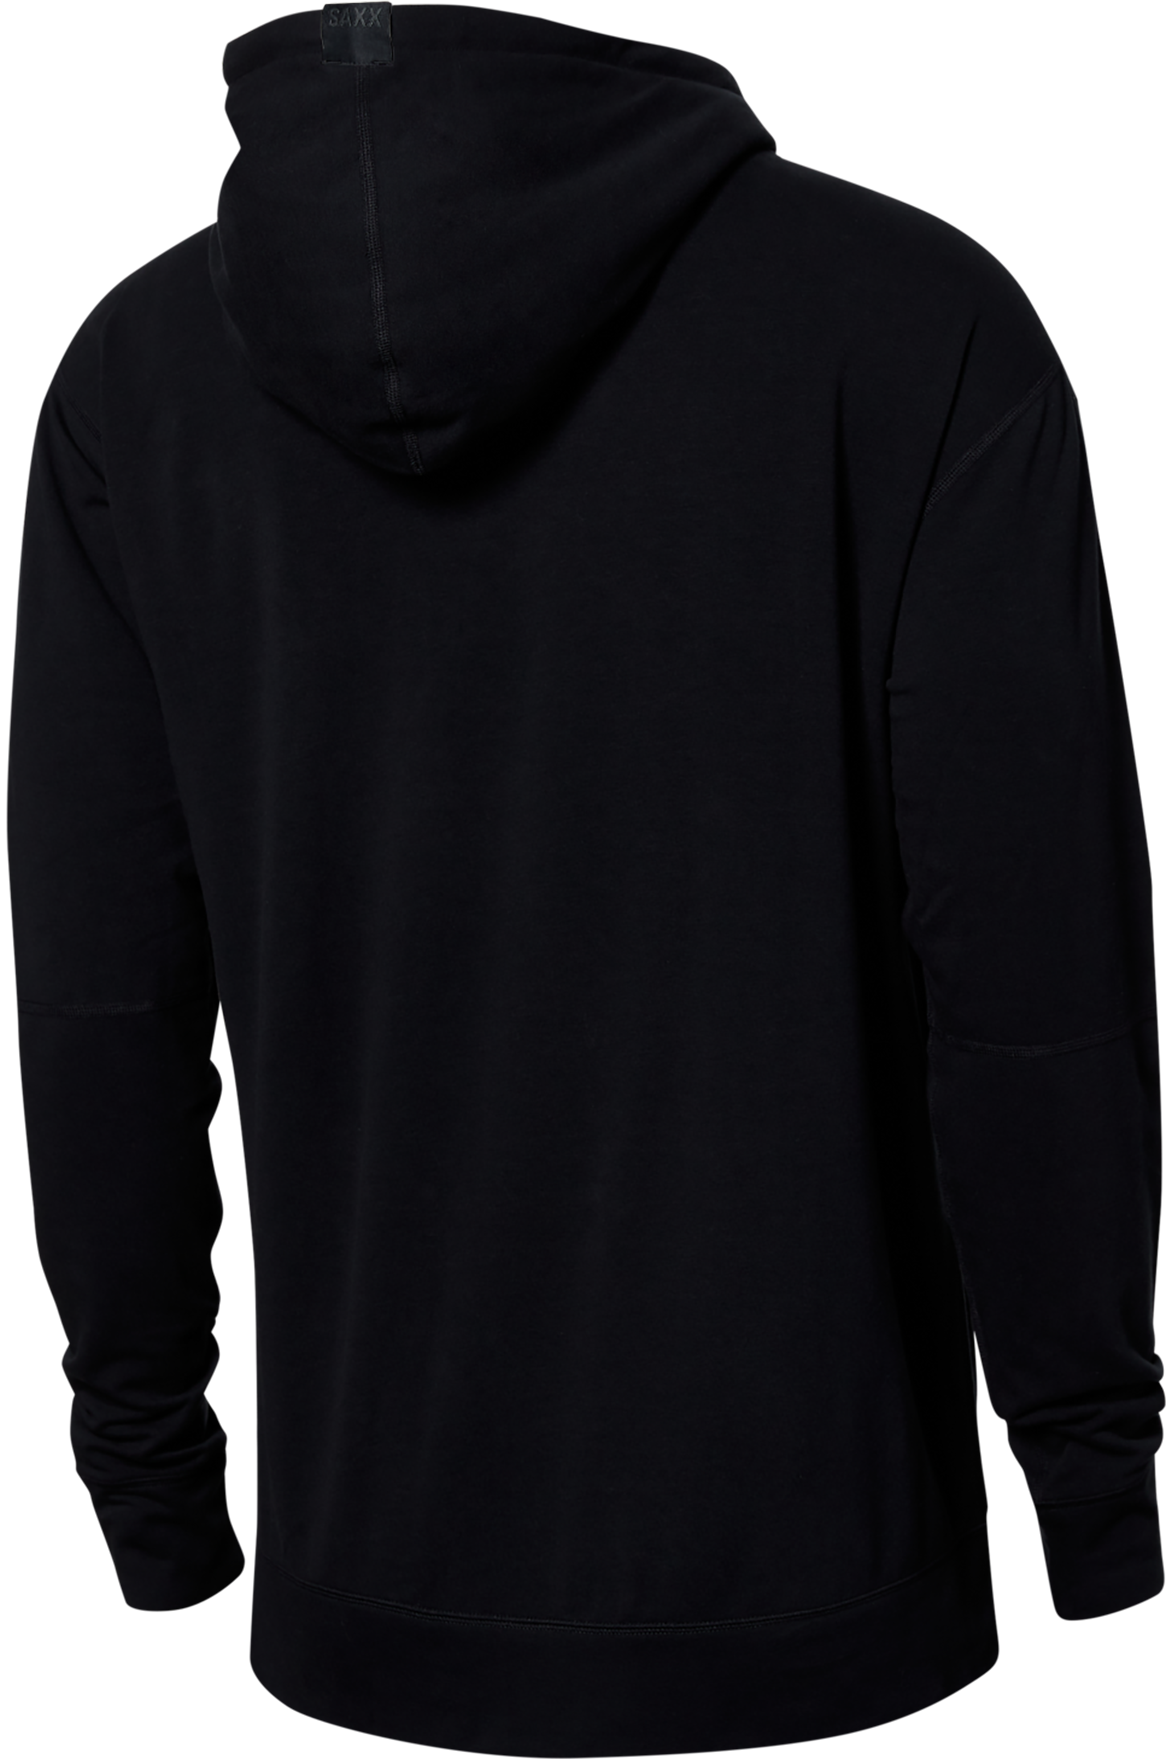 Saxx 3Six Five Hoodie - Style SXLH37 BLK, back